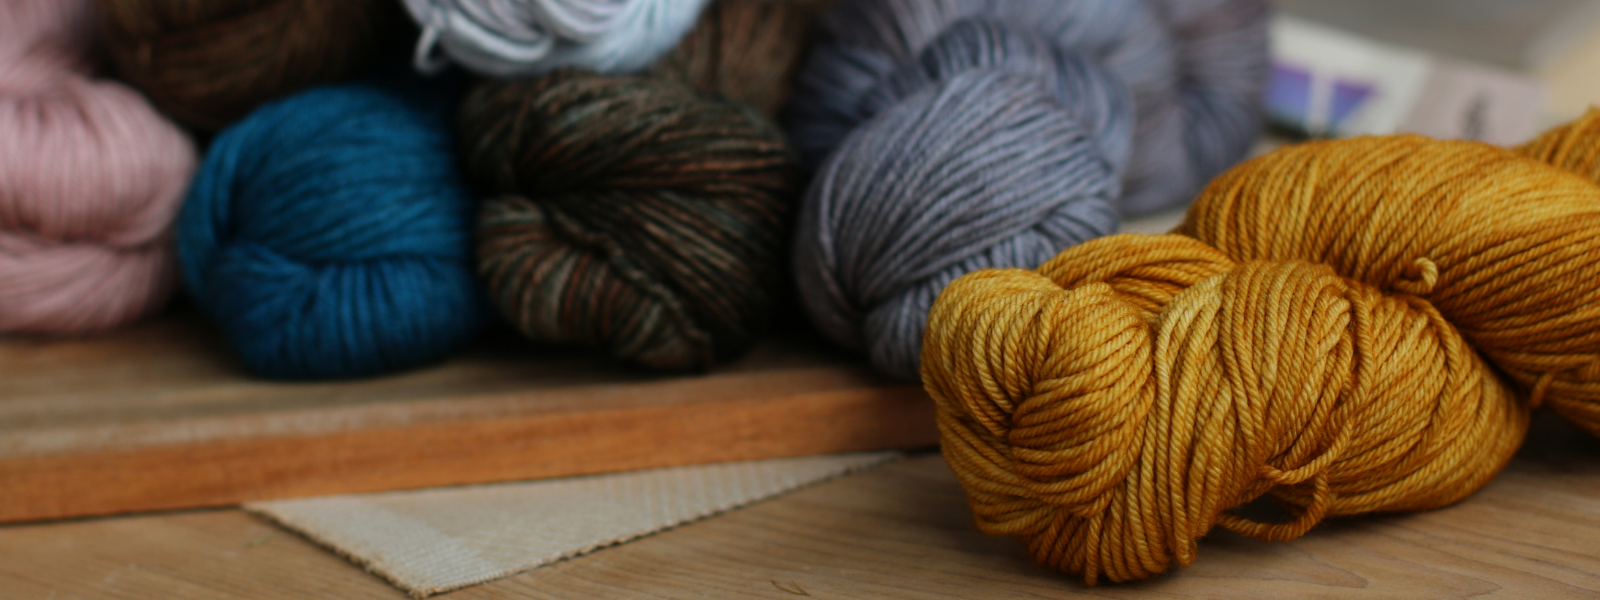 How to Choose Your Yarn for a Knitting Project - Stolen Stitches